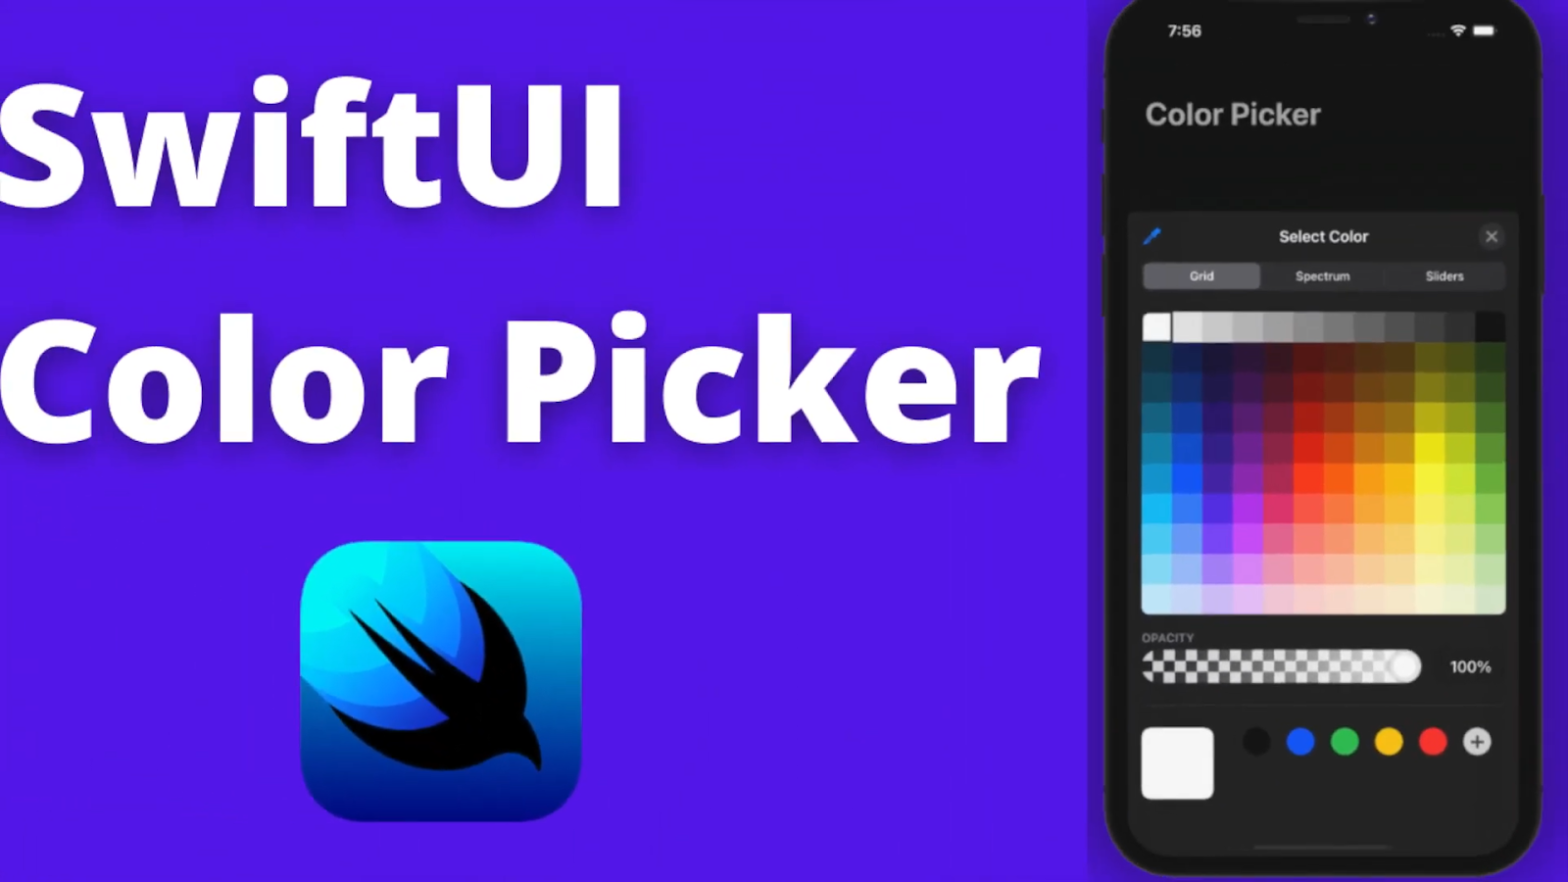 blue banner with "SwiftUI Color Picker" with a smartphone showcasing a colorful palette